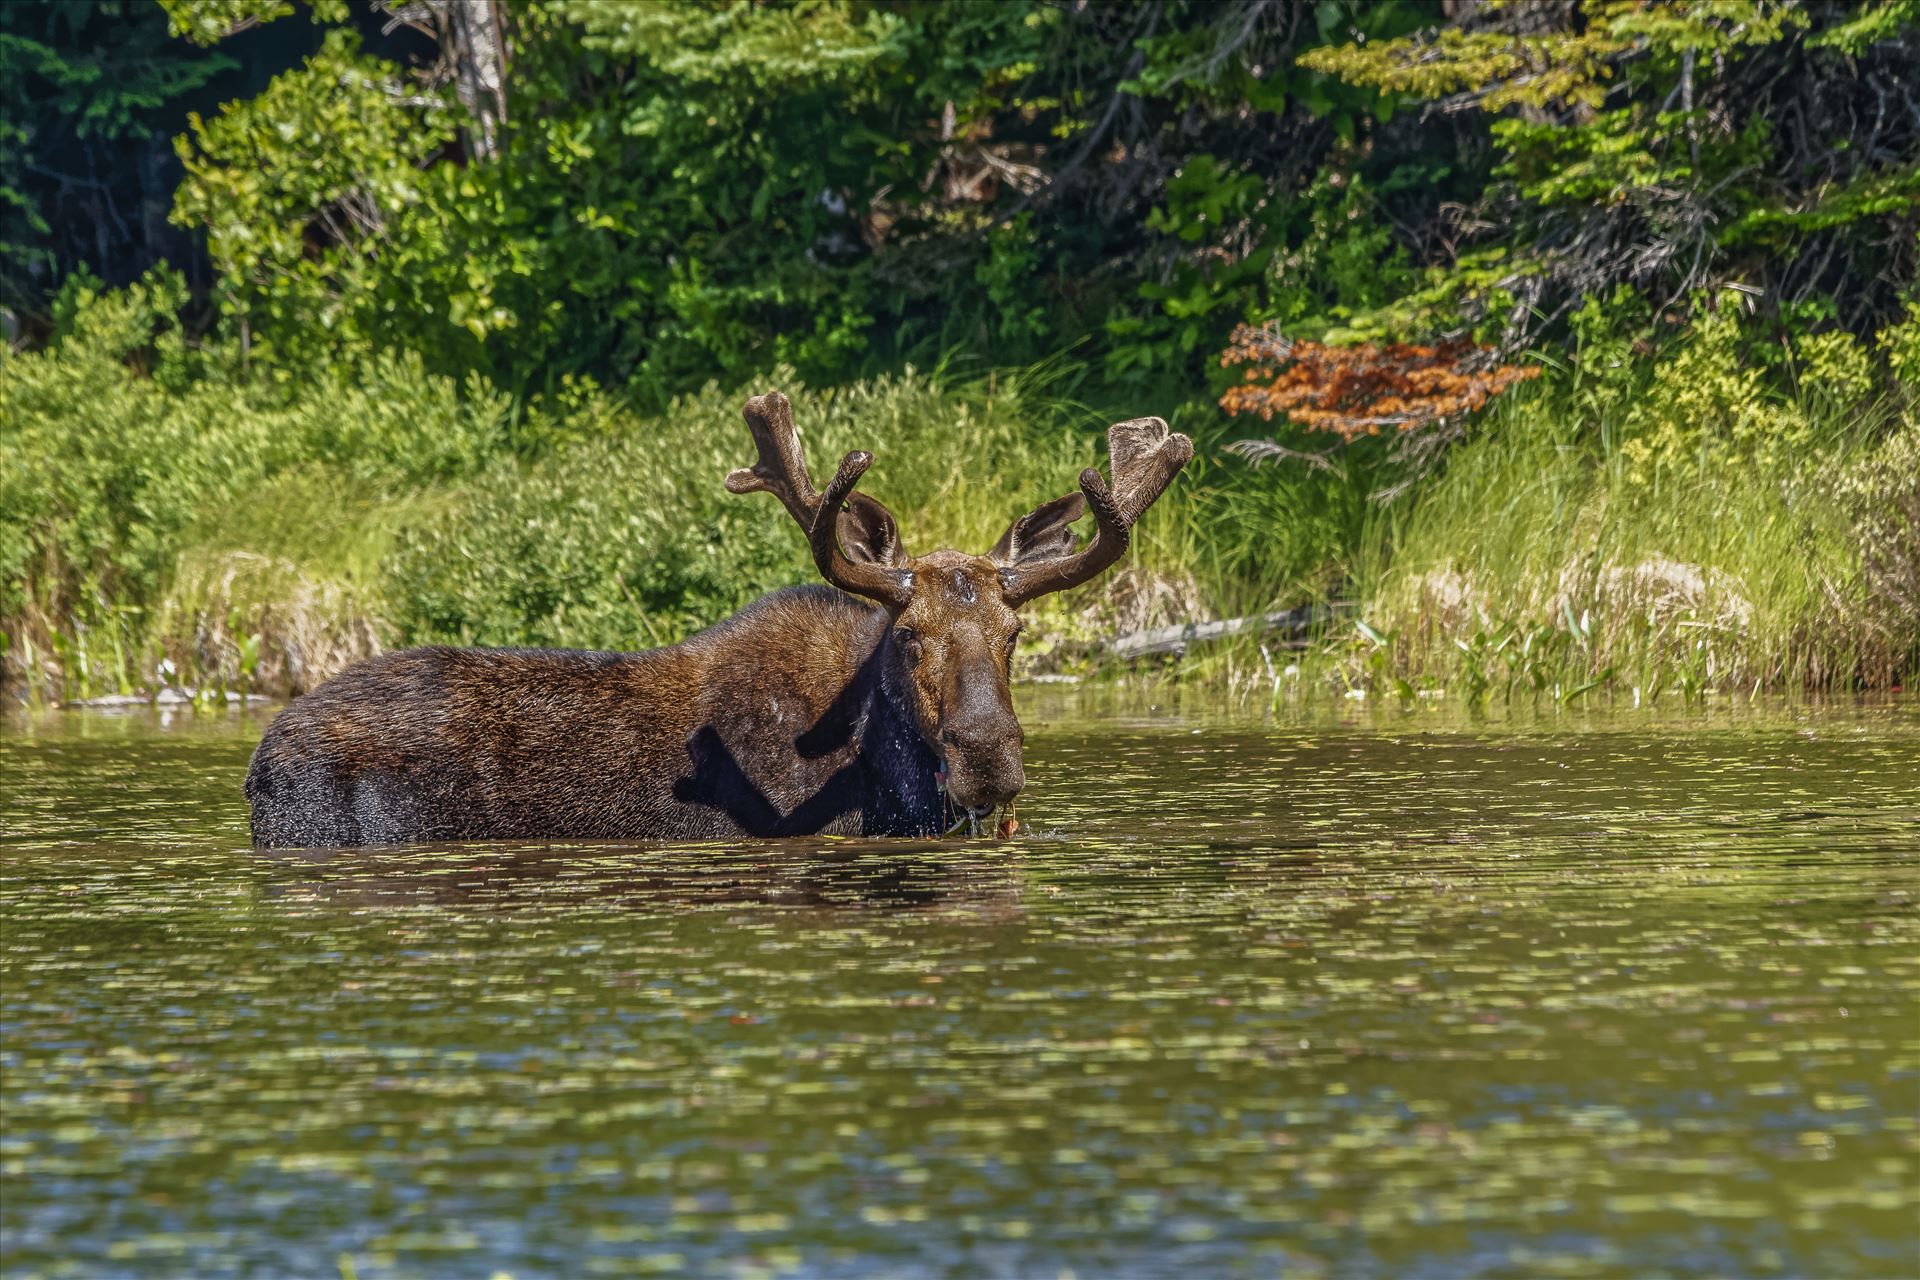 Bull Moose at a Small Pond Moose at a Small Pond Off of Golden Road, Maine by Buckmaster